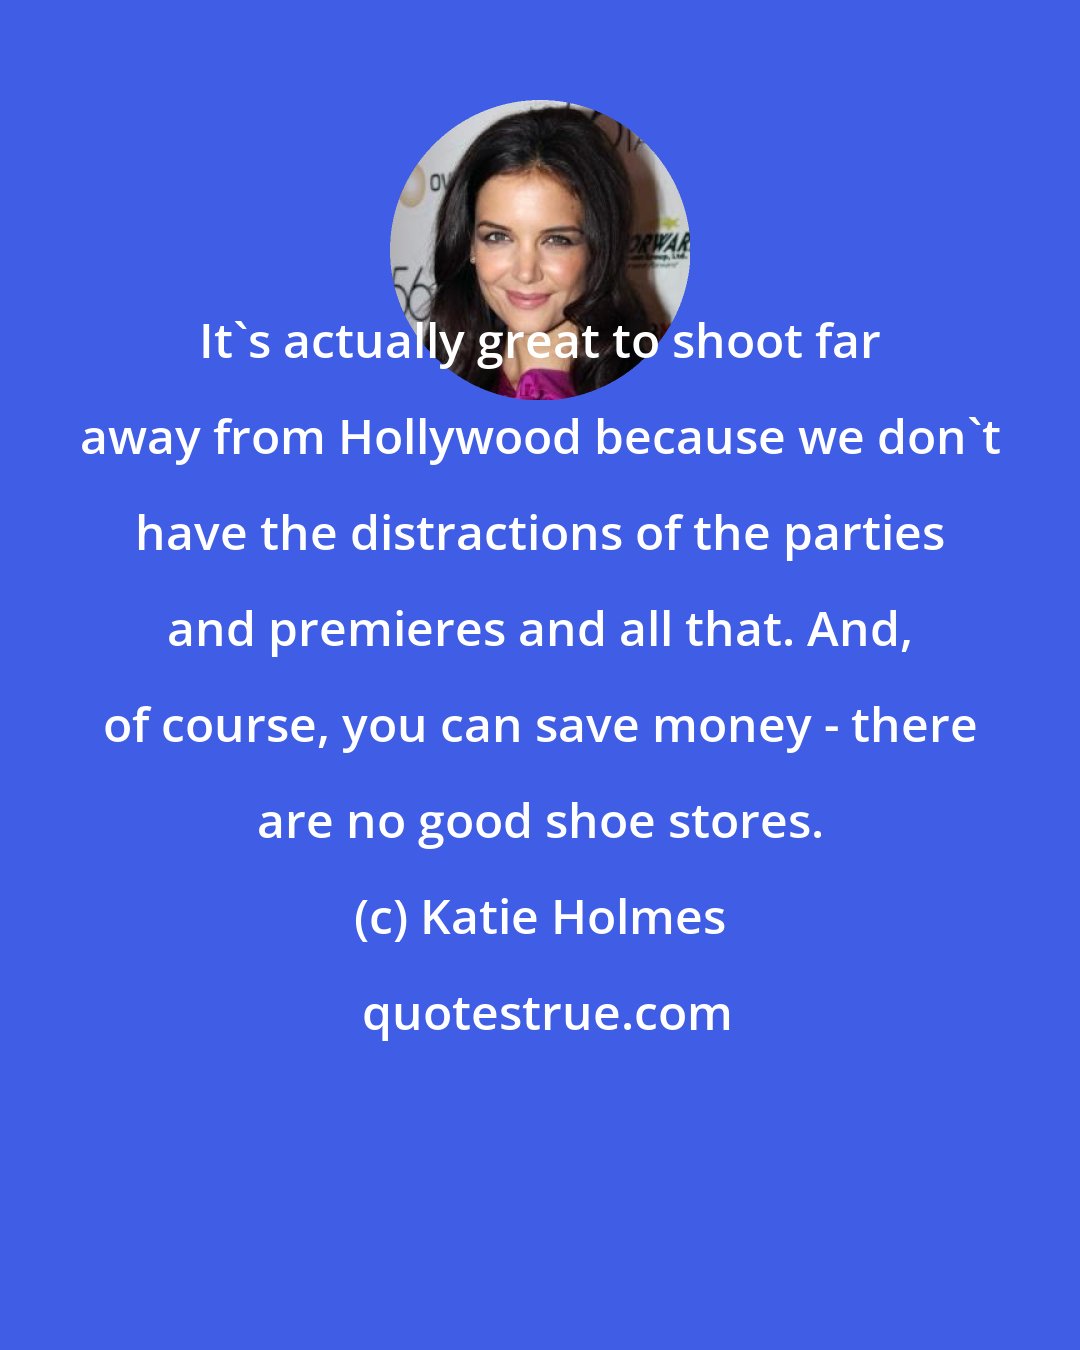 Katie Holmes: It's actually great to shoot far away from Hollywood because we don't have the distractions of the parties and premieres and all that. And, of course, you can save money - there are no good shoe stores.